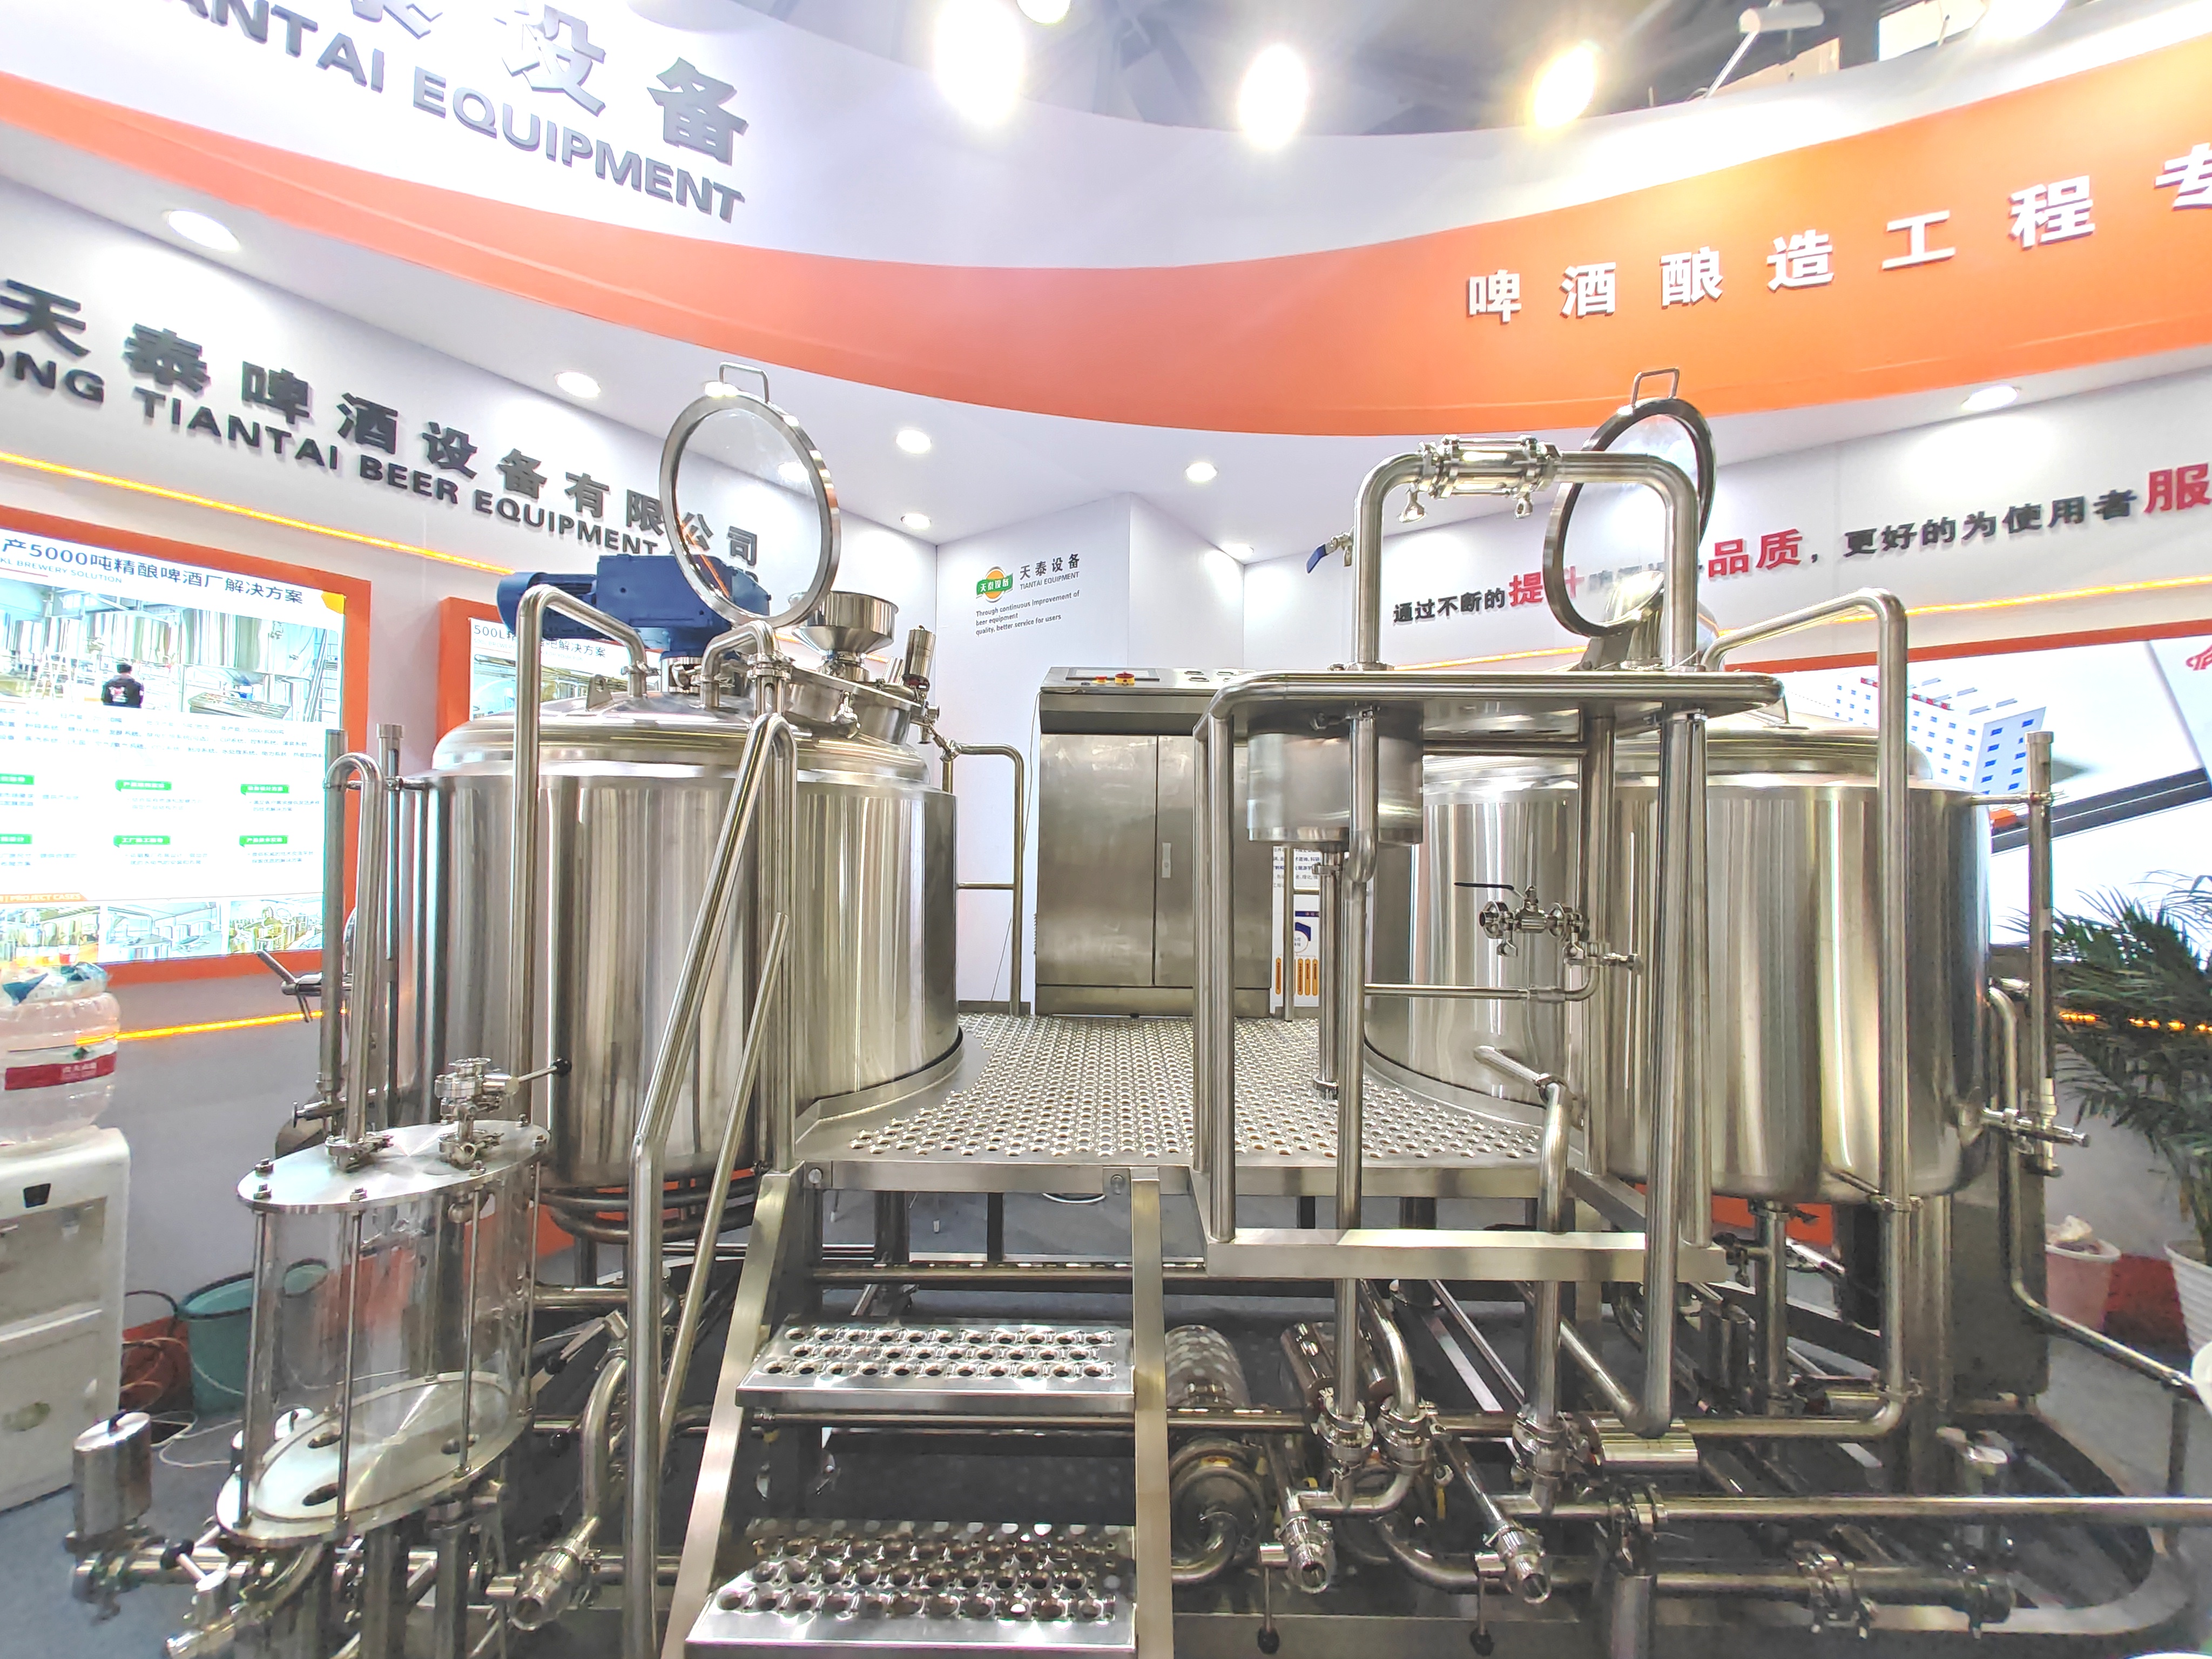 Some features of Tiantai brewery equipment-- 500L brewhouse